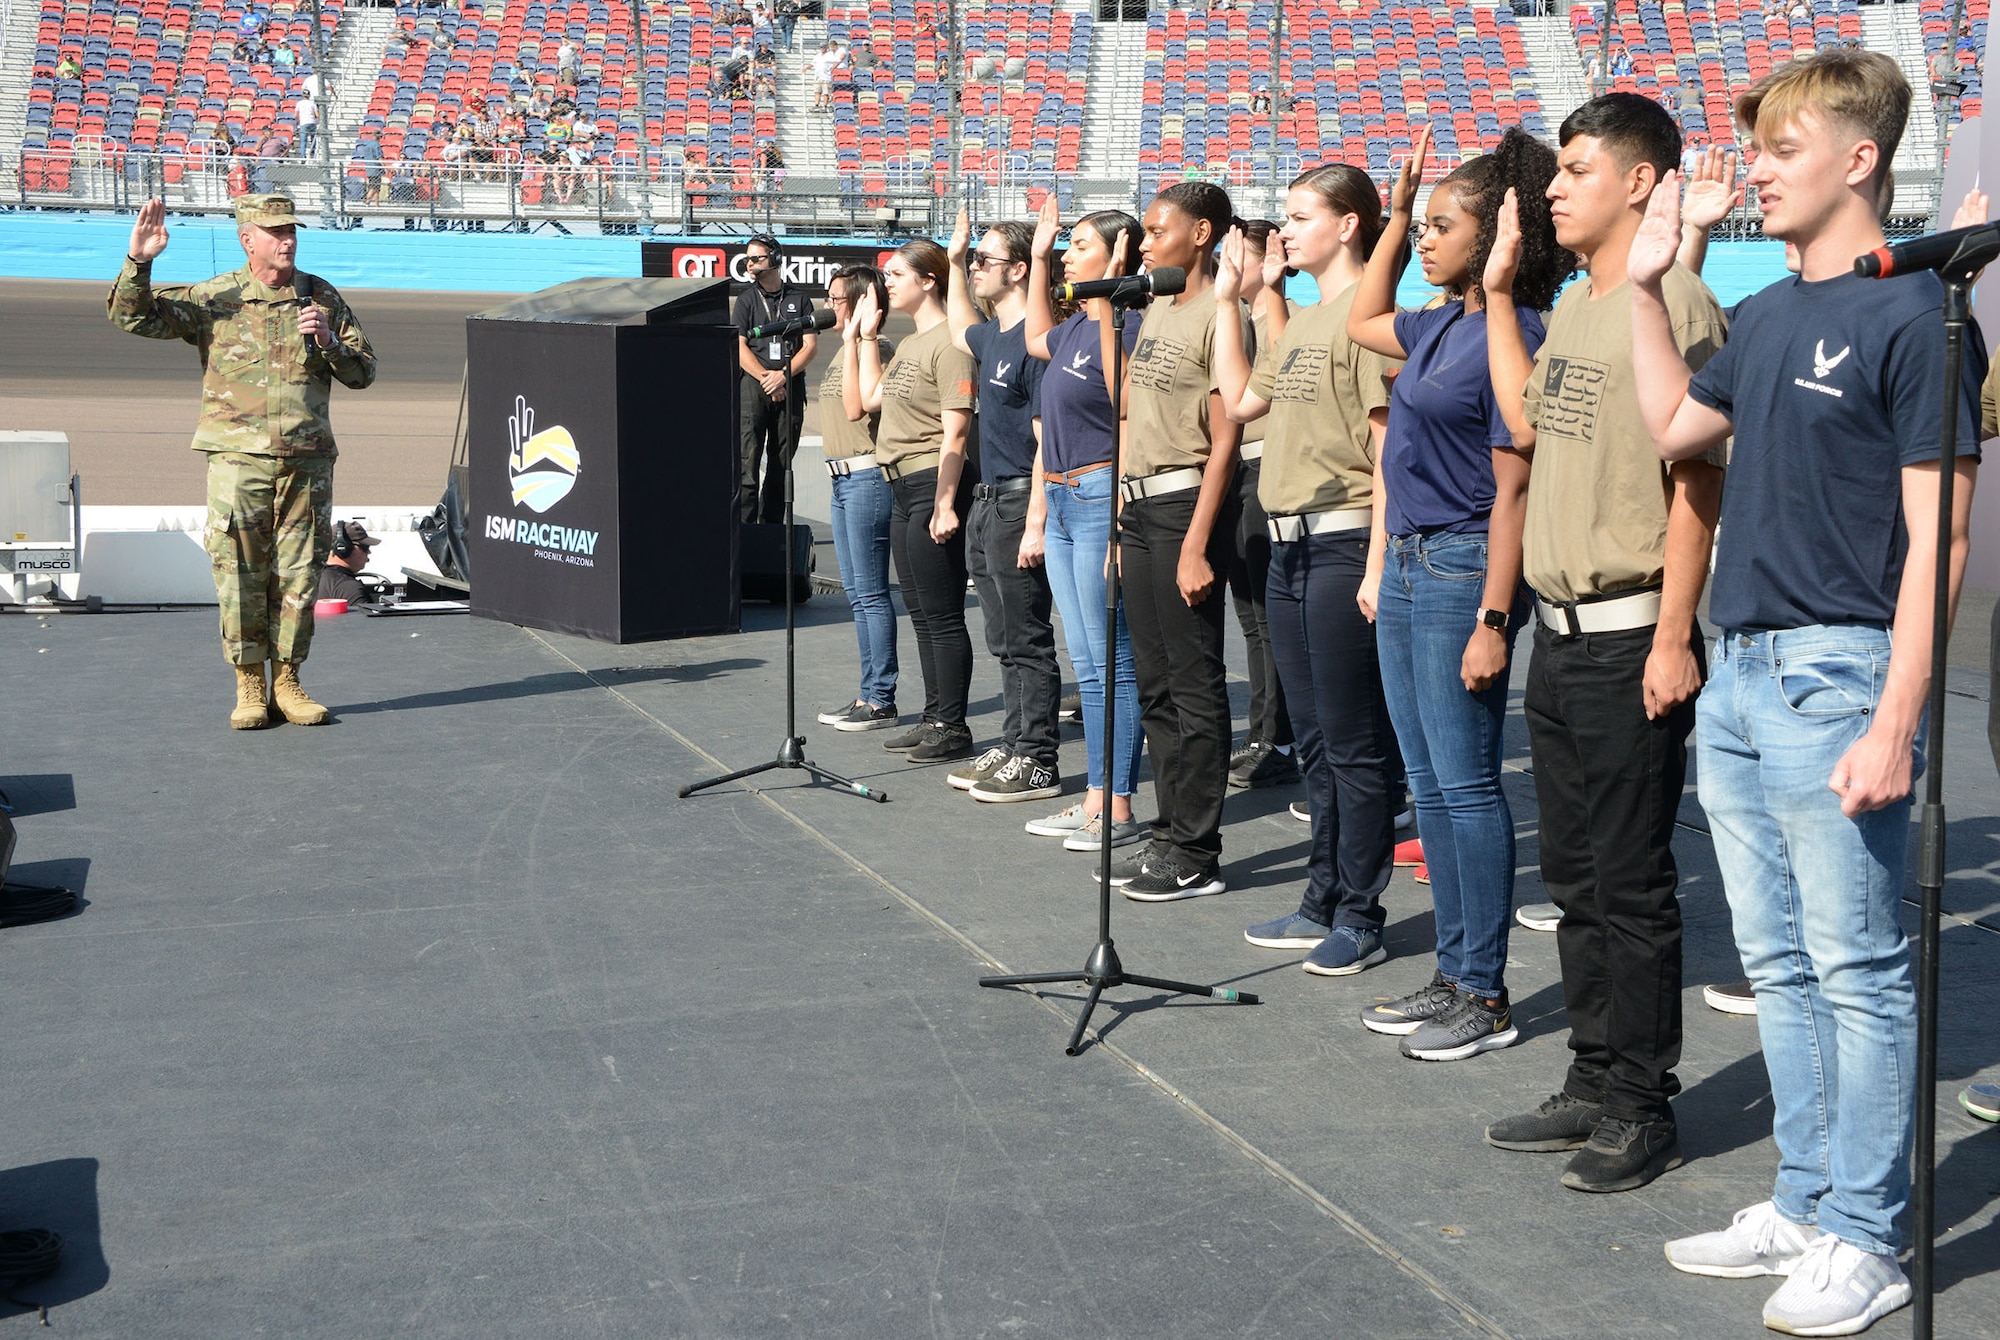 Gen. David L. Goldfein, Air Force chief of staff, conducts a total force enlistment prior to the NASCAR race Sunday in Phoenix